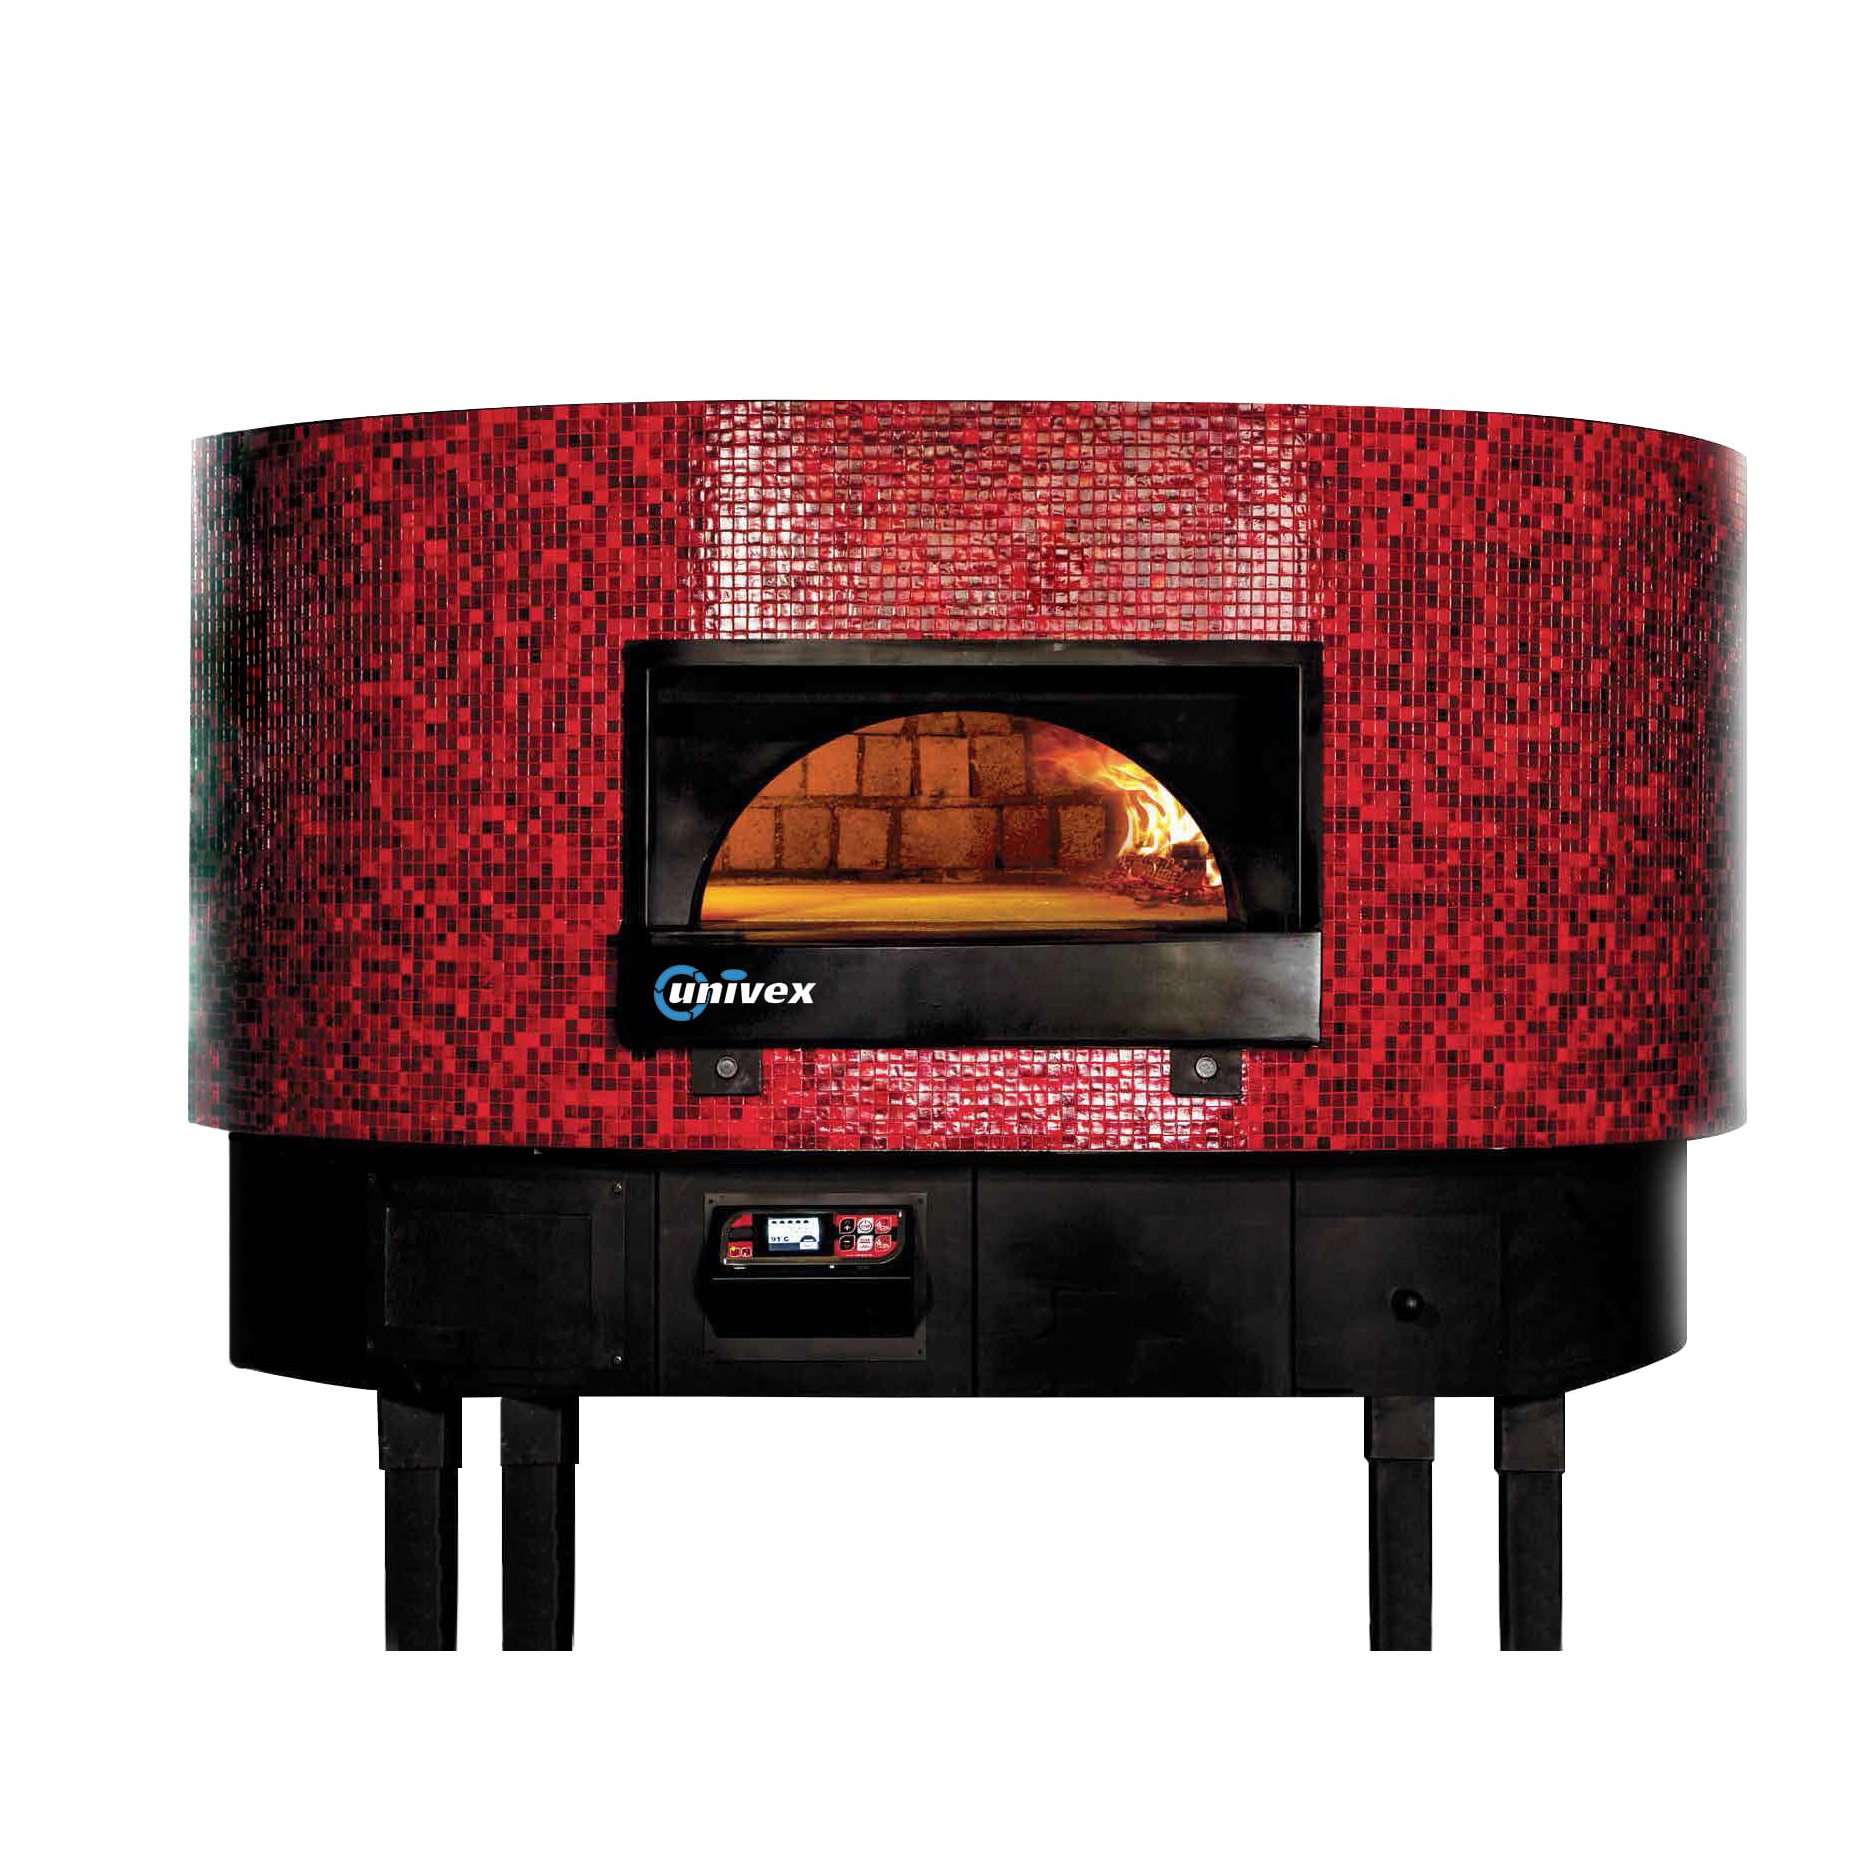 Univex DOME59FT Rotating Dome Pizza Oven w/ (14) 12″ Pizza Capacity, 55″ Cooking Chamber